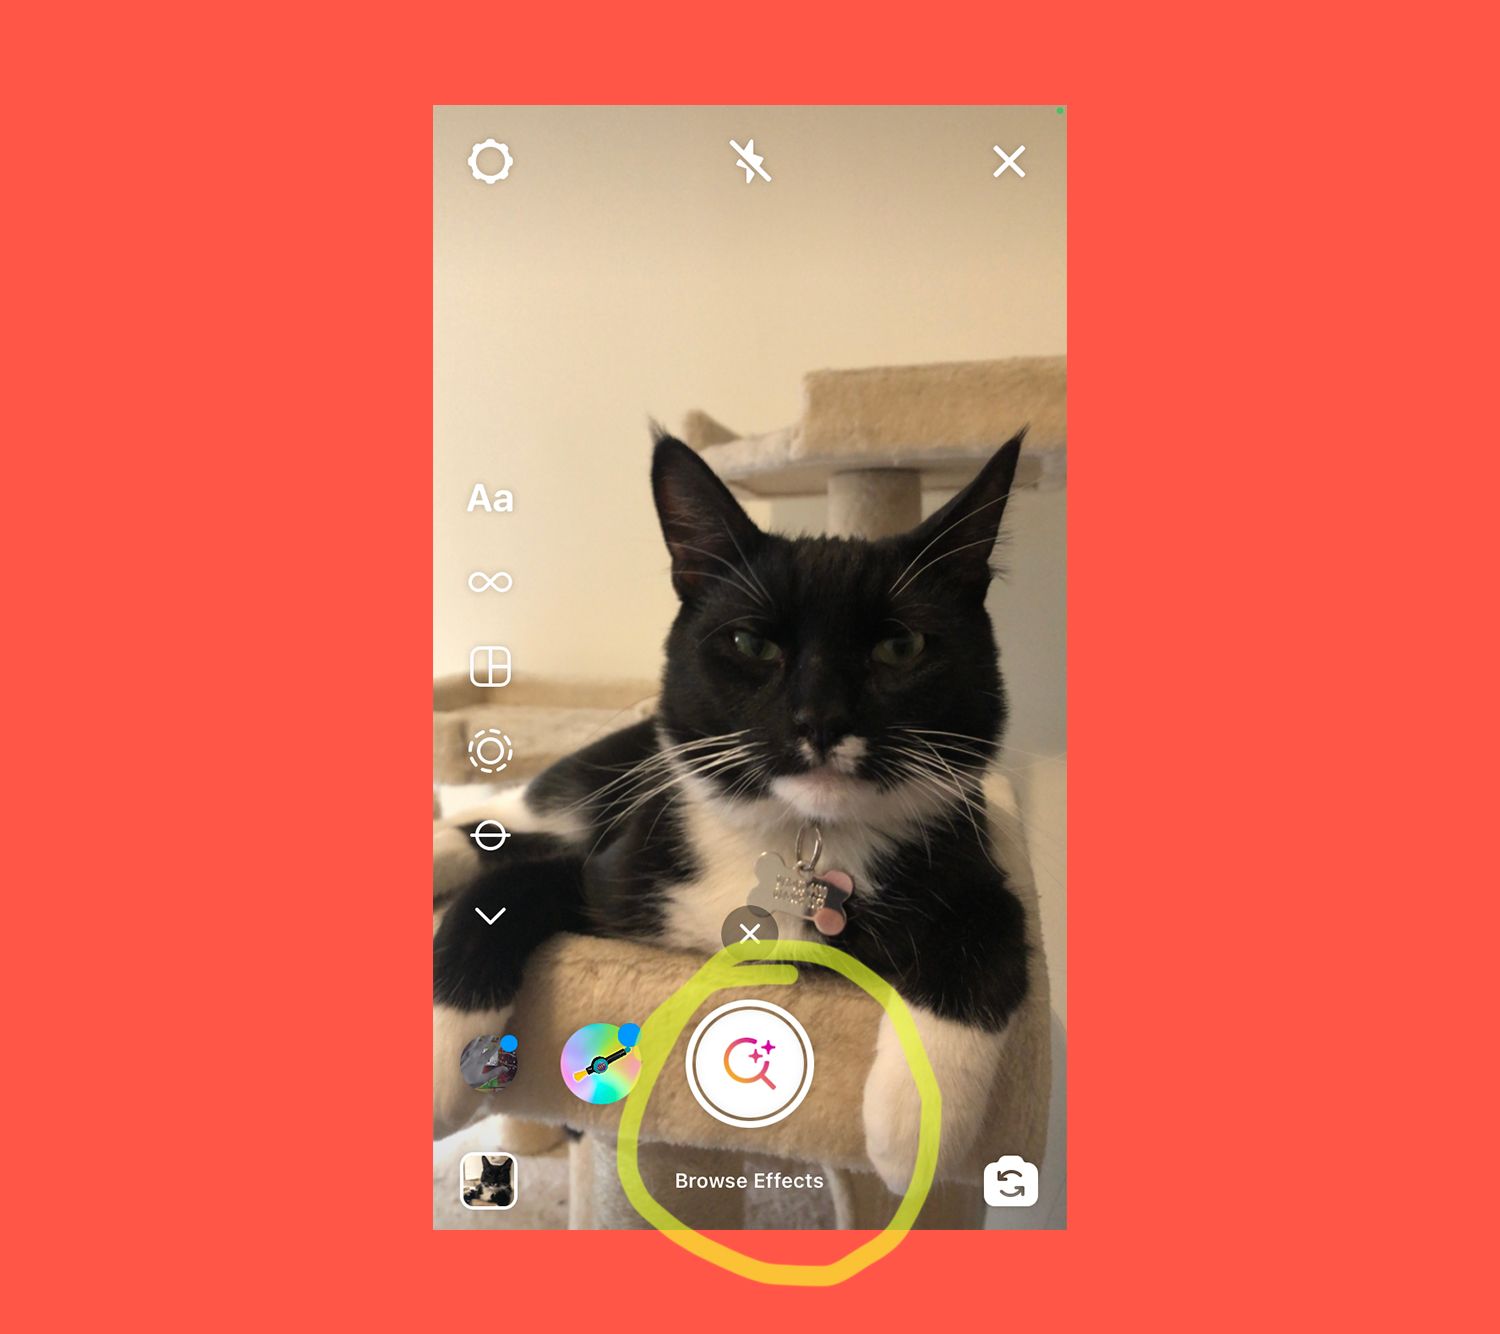 How To Use Benni's AR Filter on Instagram and Facebook